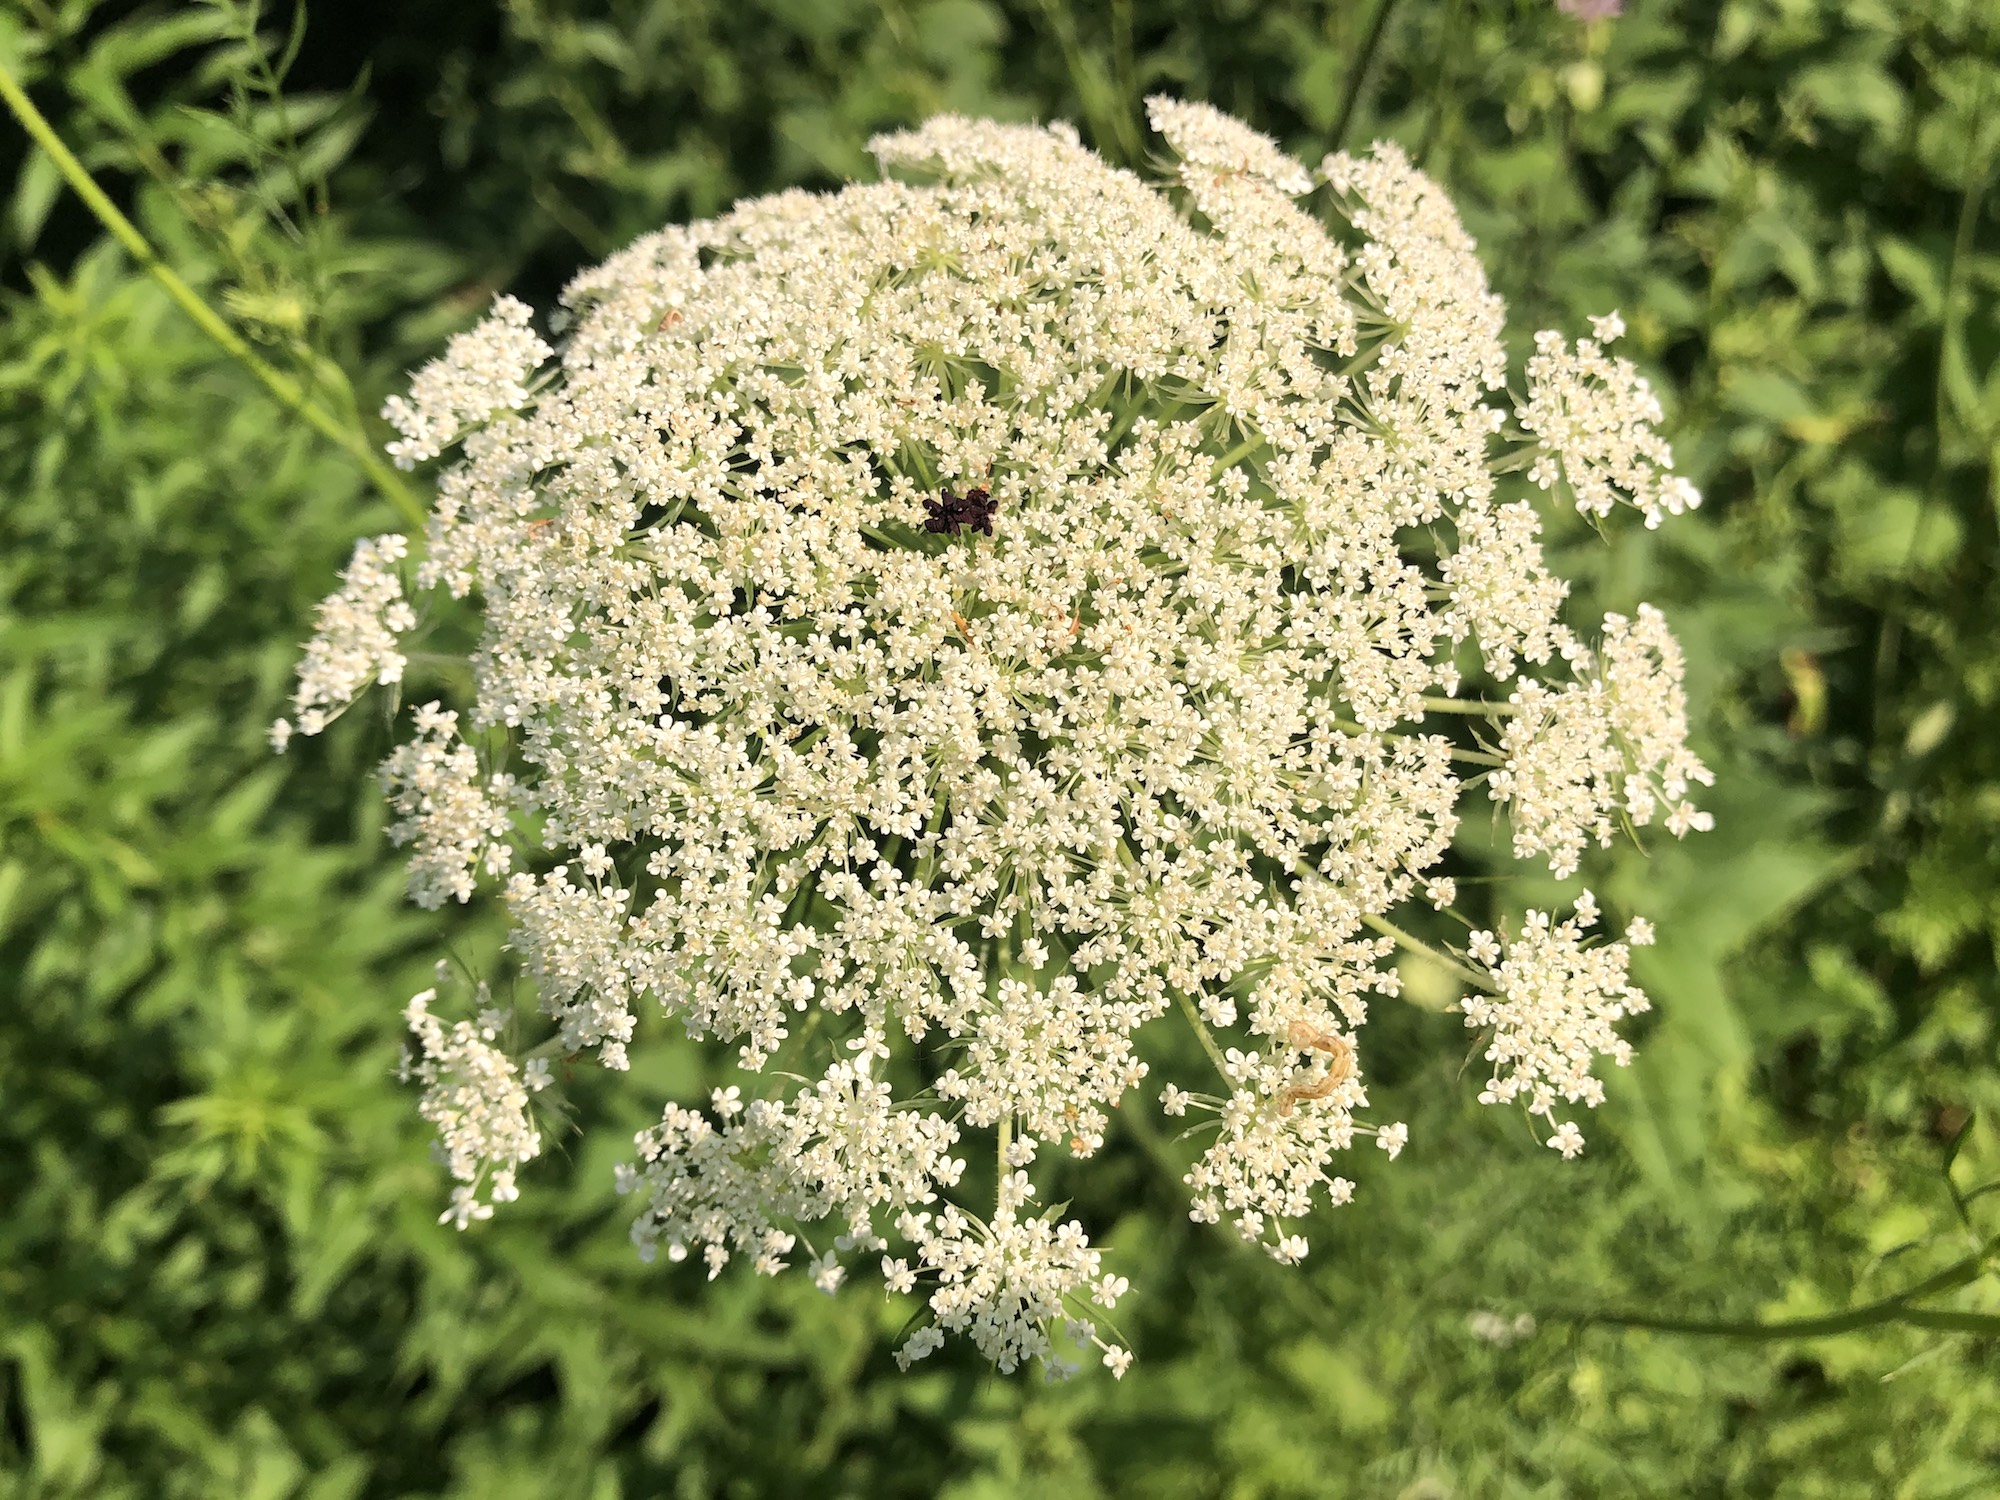 Queen Anne's Lace in Nakoma Park in Madison, WI on July 9, 2020.